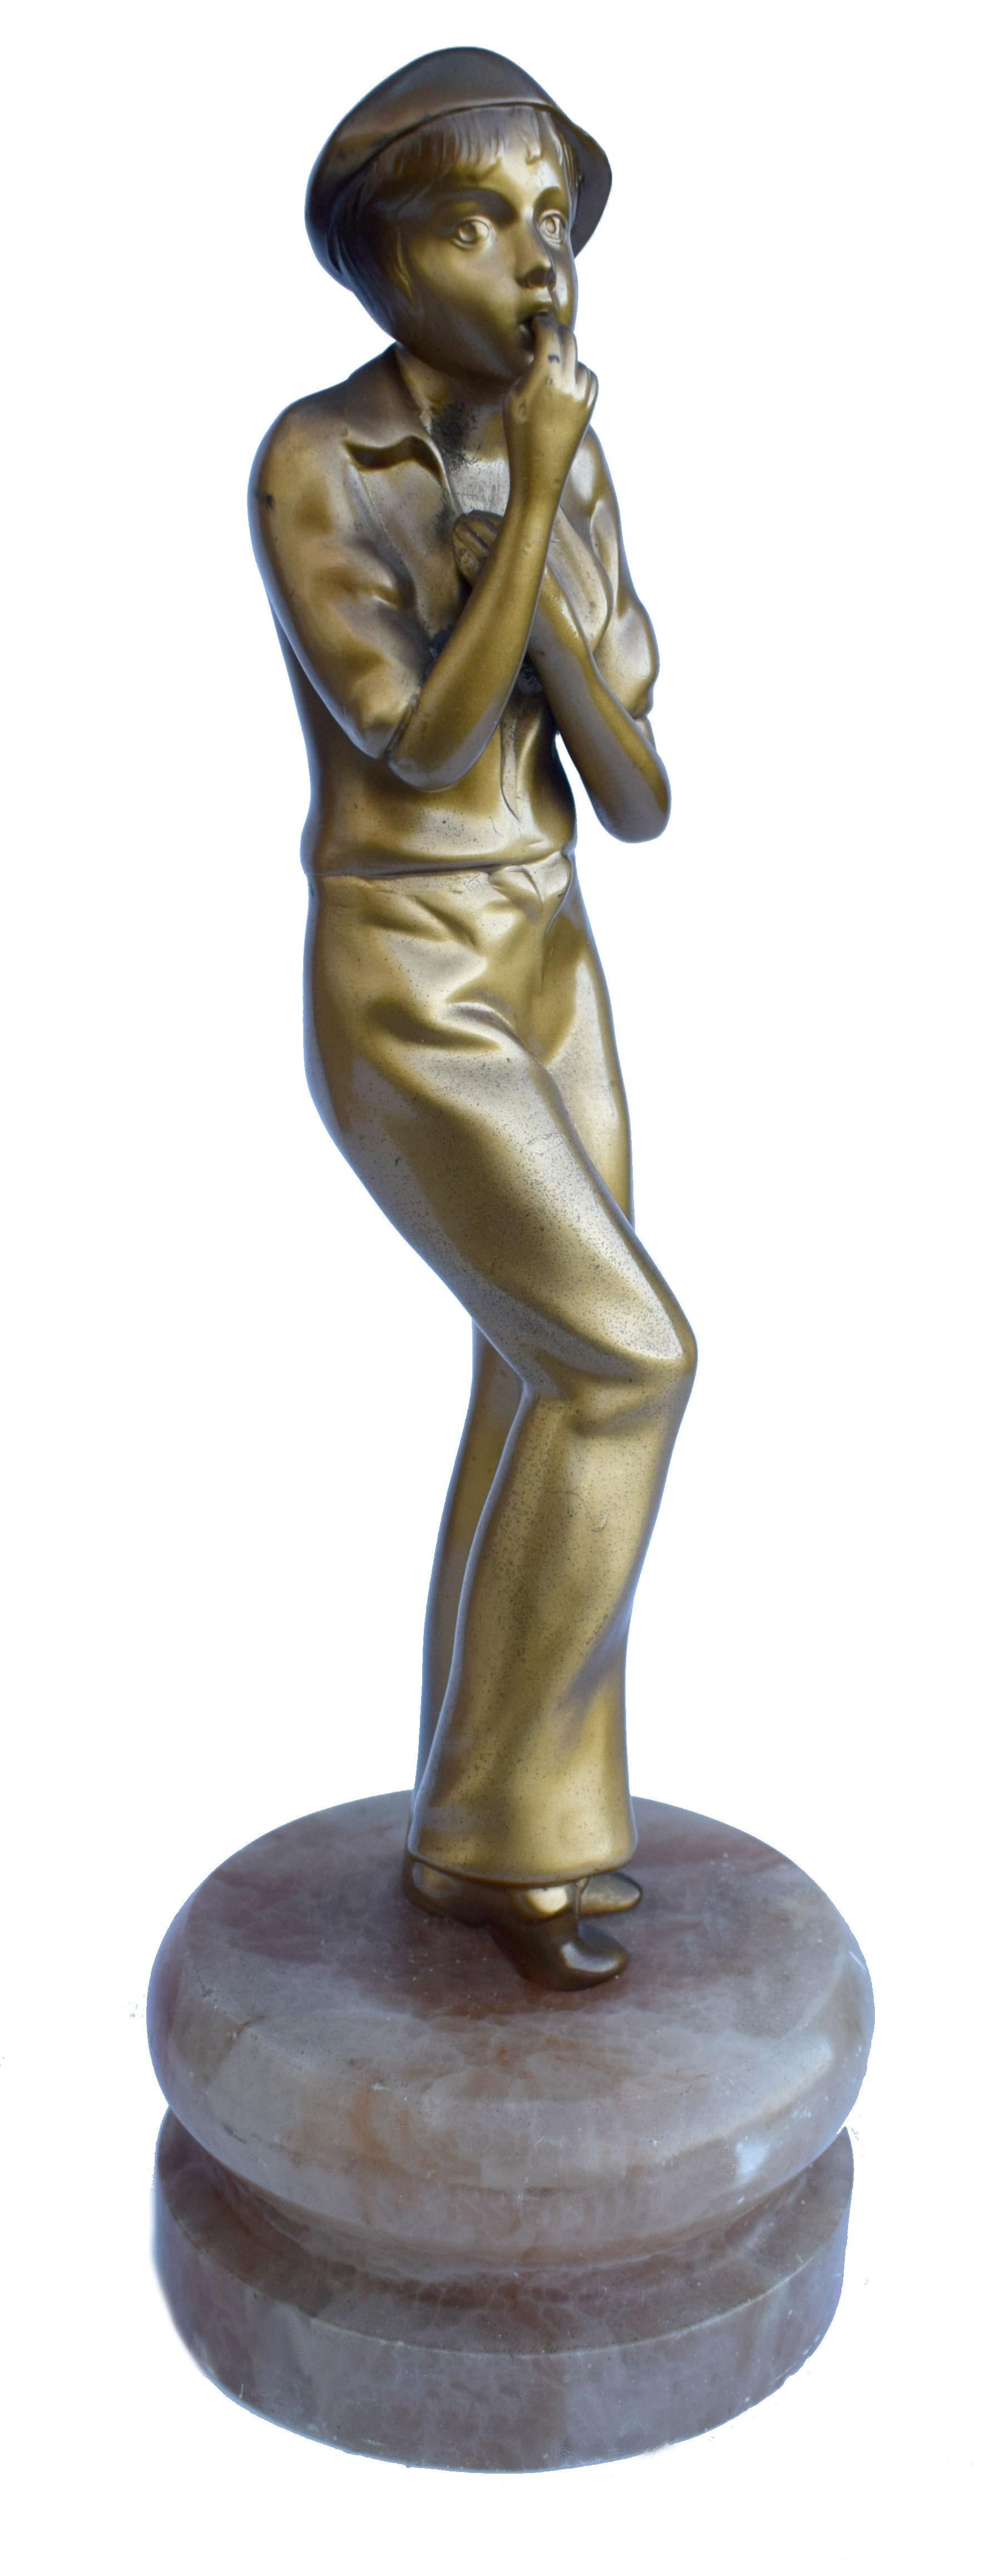 For your consideration is this original Art Deco spelter figure depicting a young women in fashion of the day, wearing slacks and top and what looks like a helmet / cloche hat. She's a substantial figure standing over 28 cm tall. She's in great